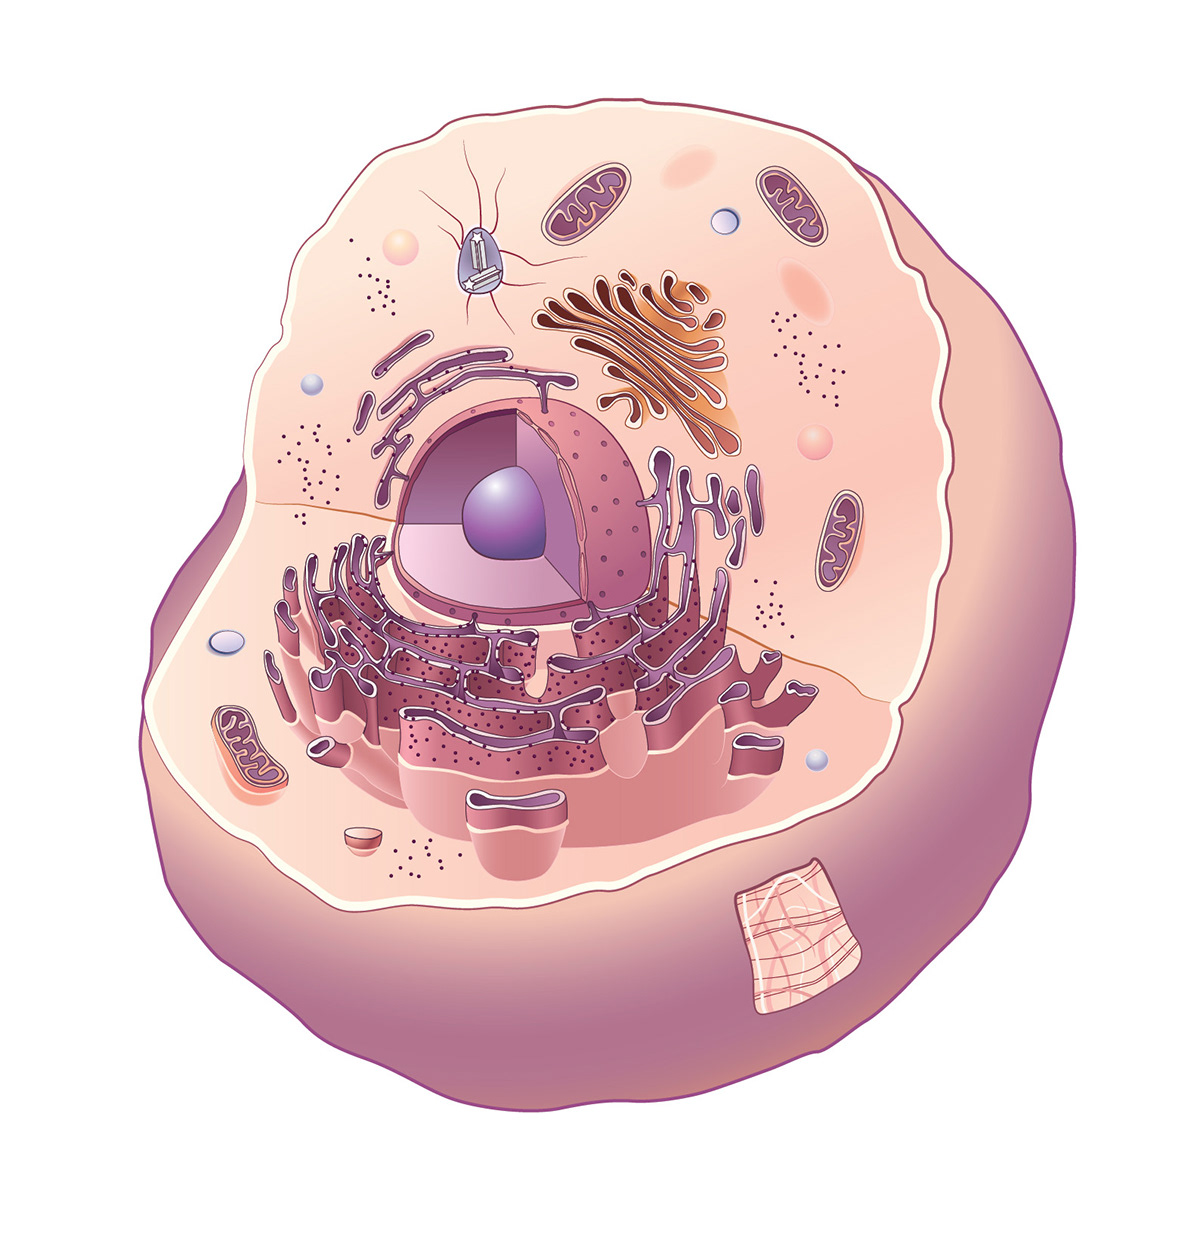 cells animal cell Plant Cell scientific illustration